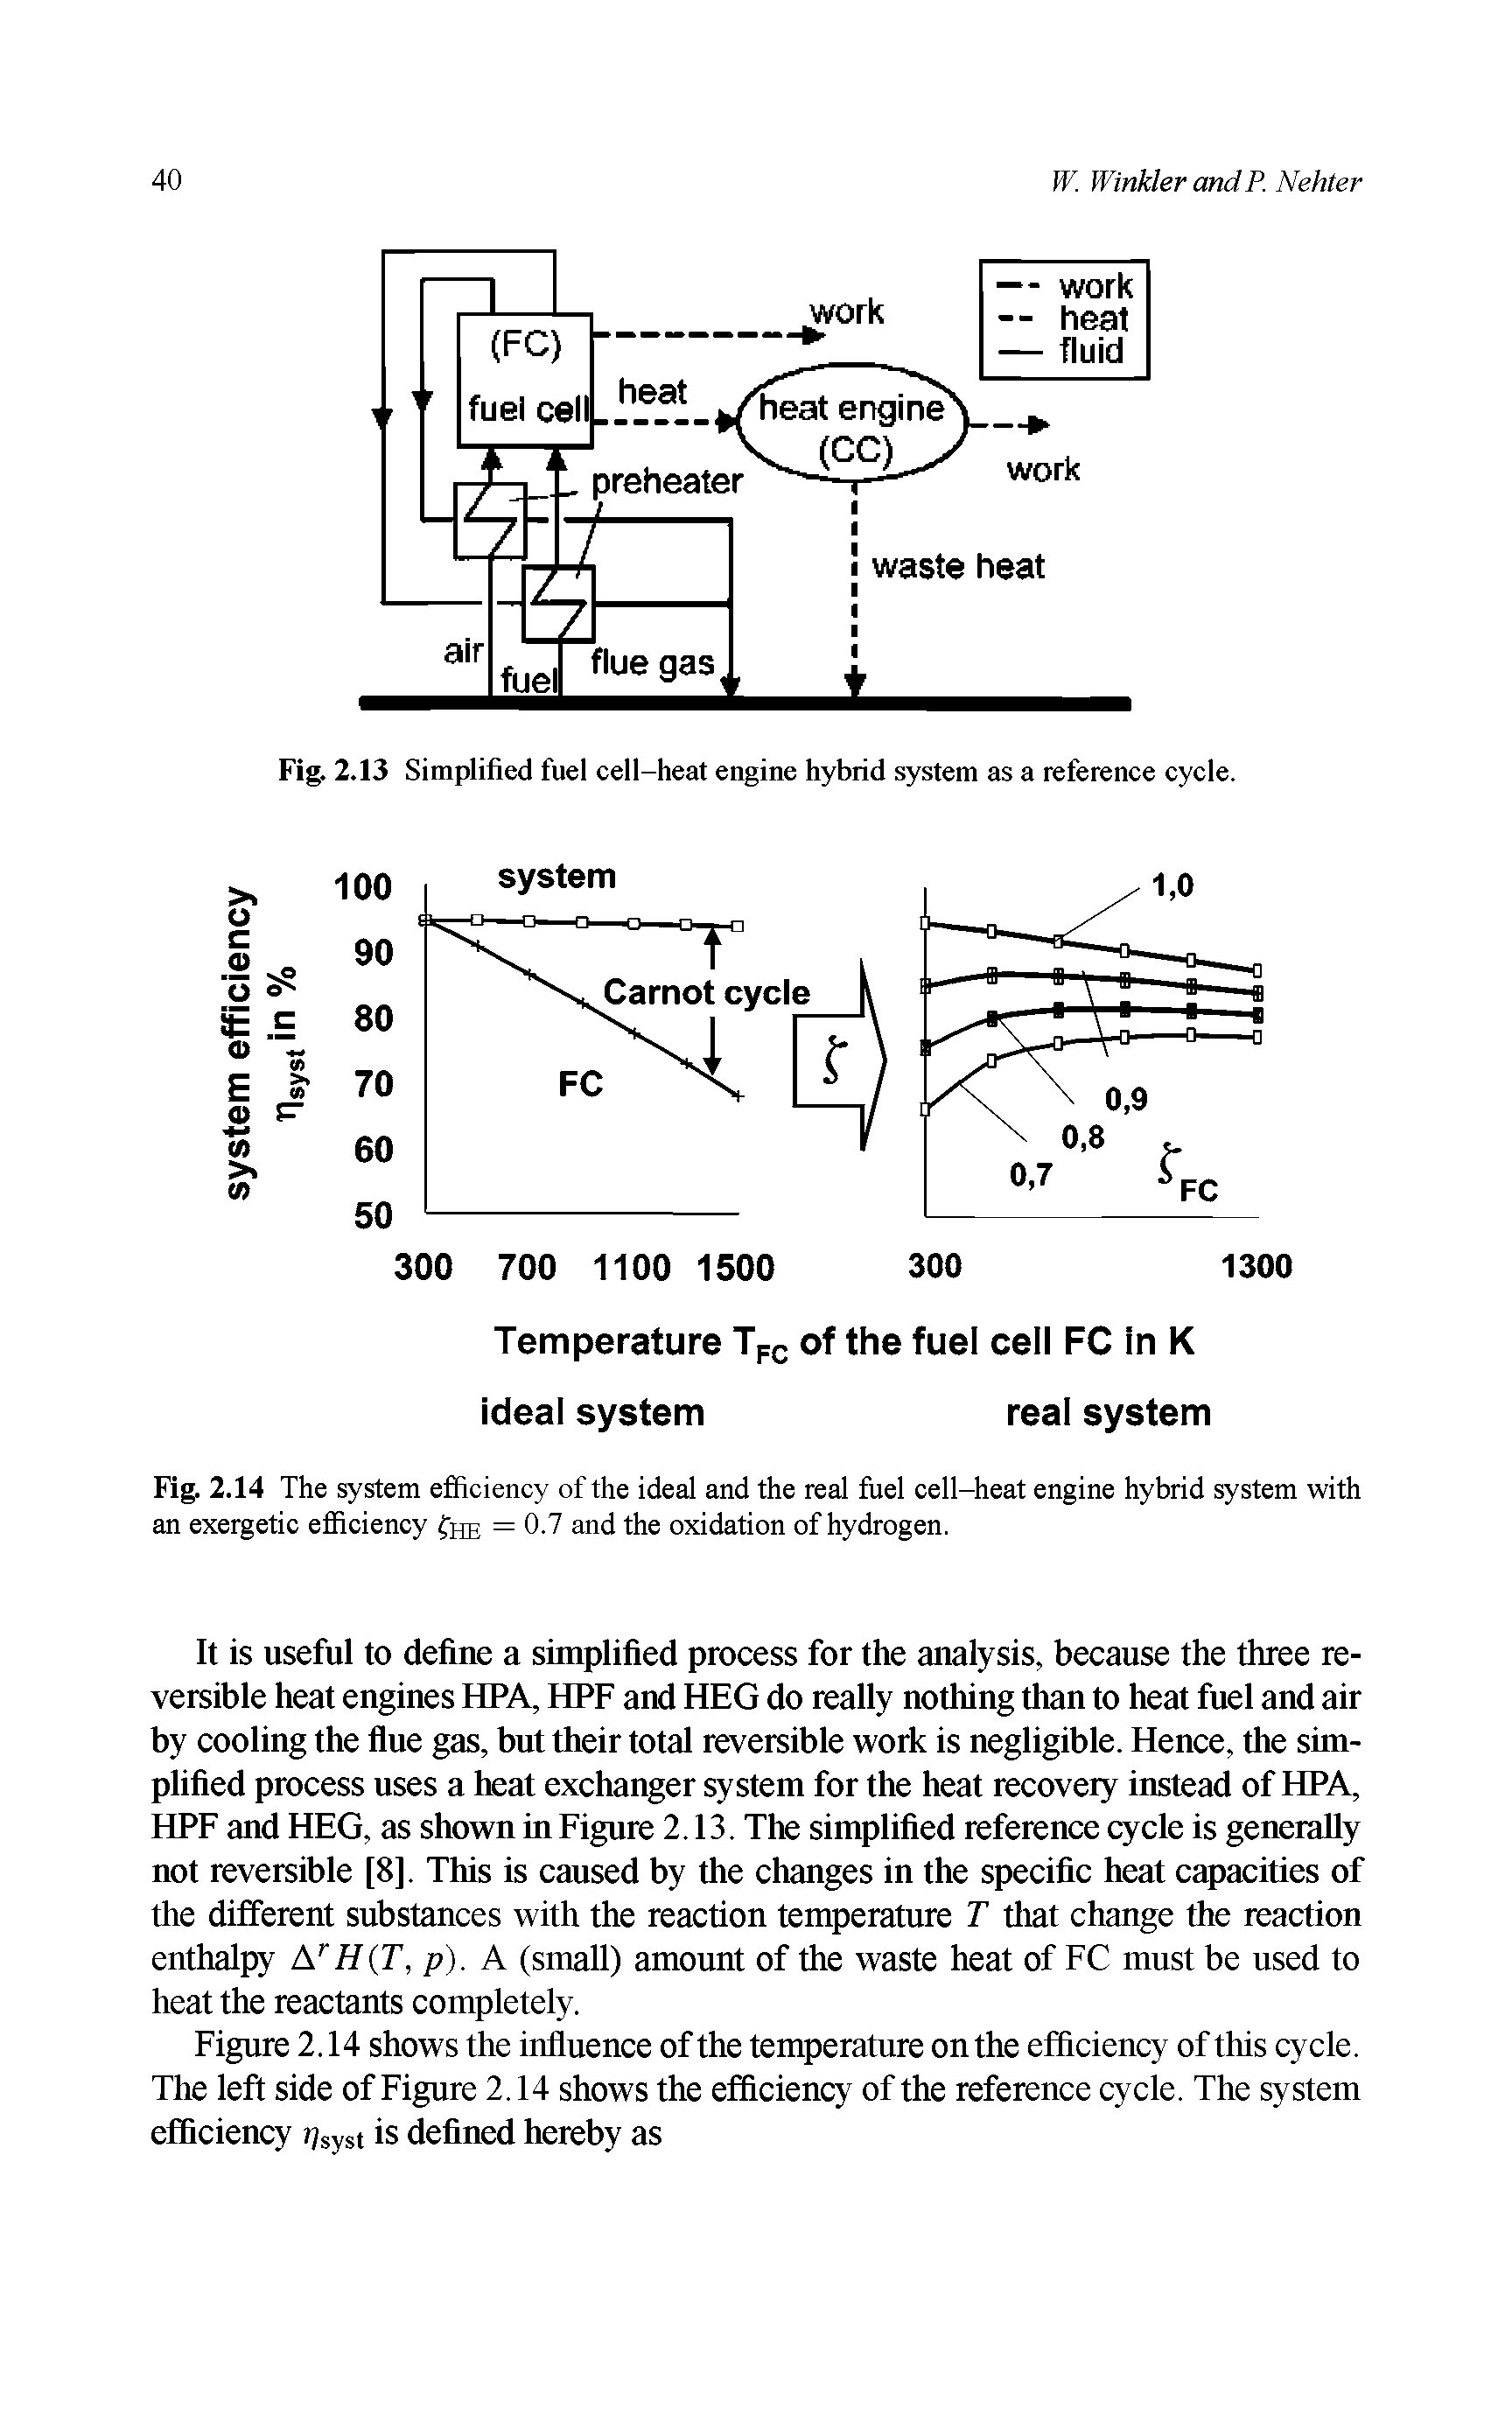 Fig. 2.14 The system efficiency of the ideal and the real fuel cell-heat engine hybrid system with an exergetic efficiency he = 0.7 and the oxidation of hydrogen.